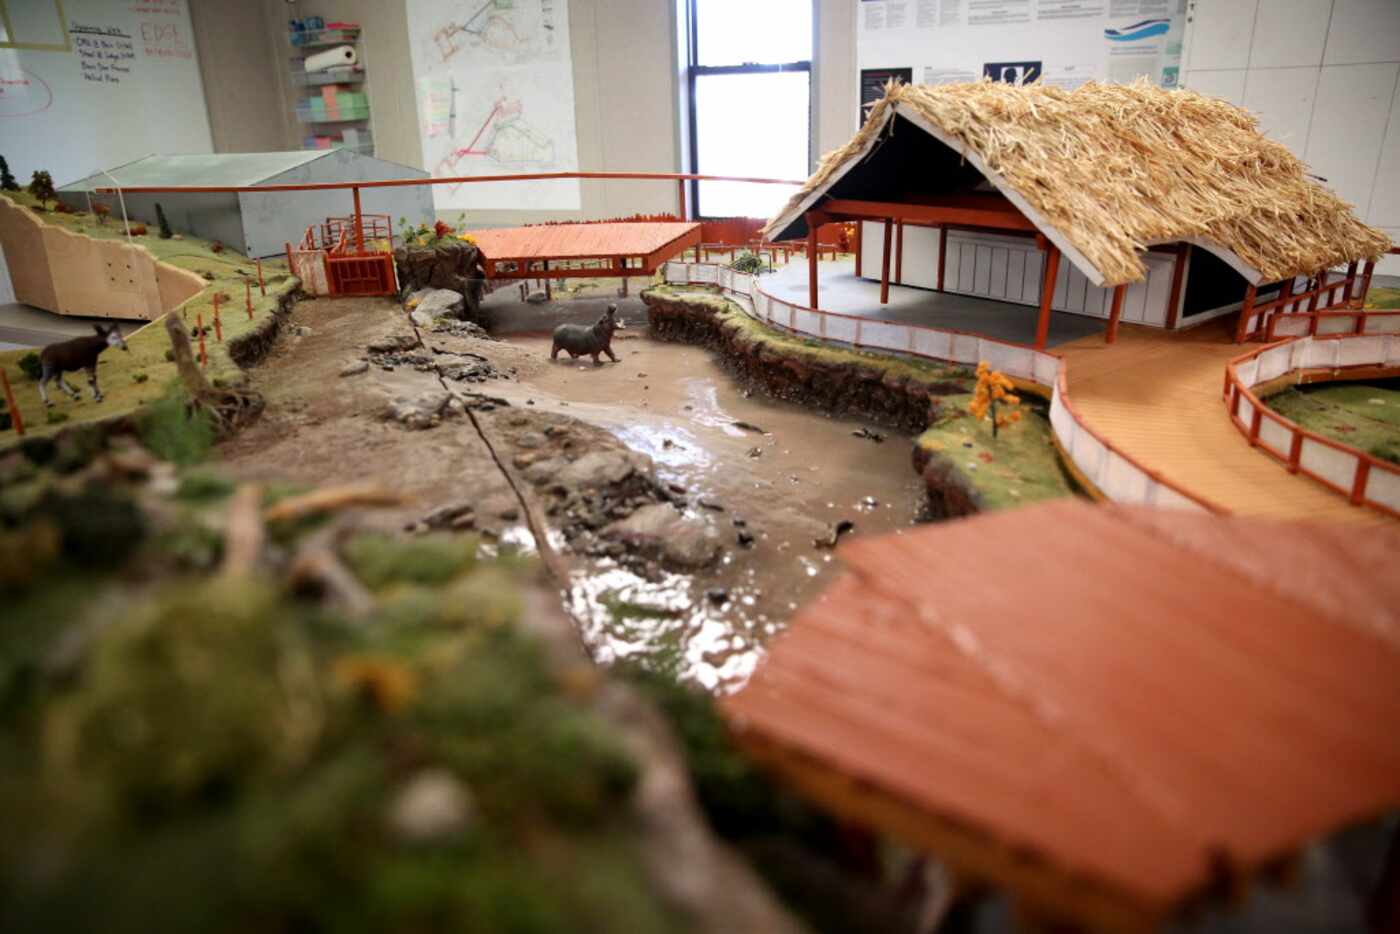 A model of the Simmons Hippo Outpost was on display at the Dallas Zoo on Dec. 1.